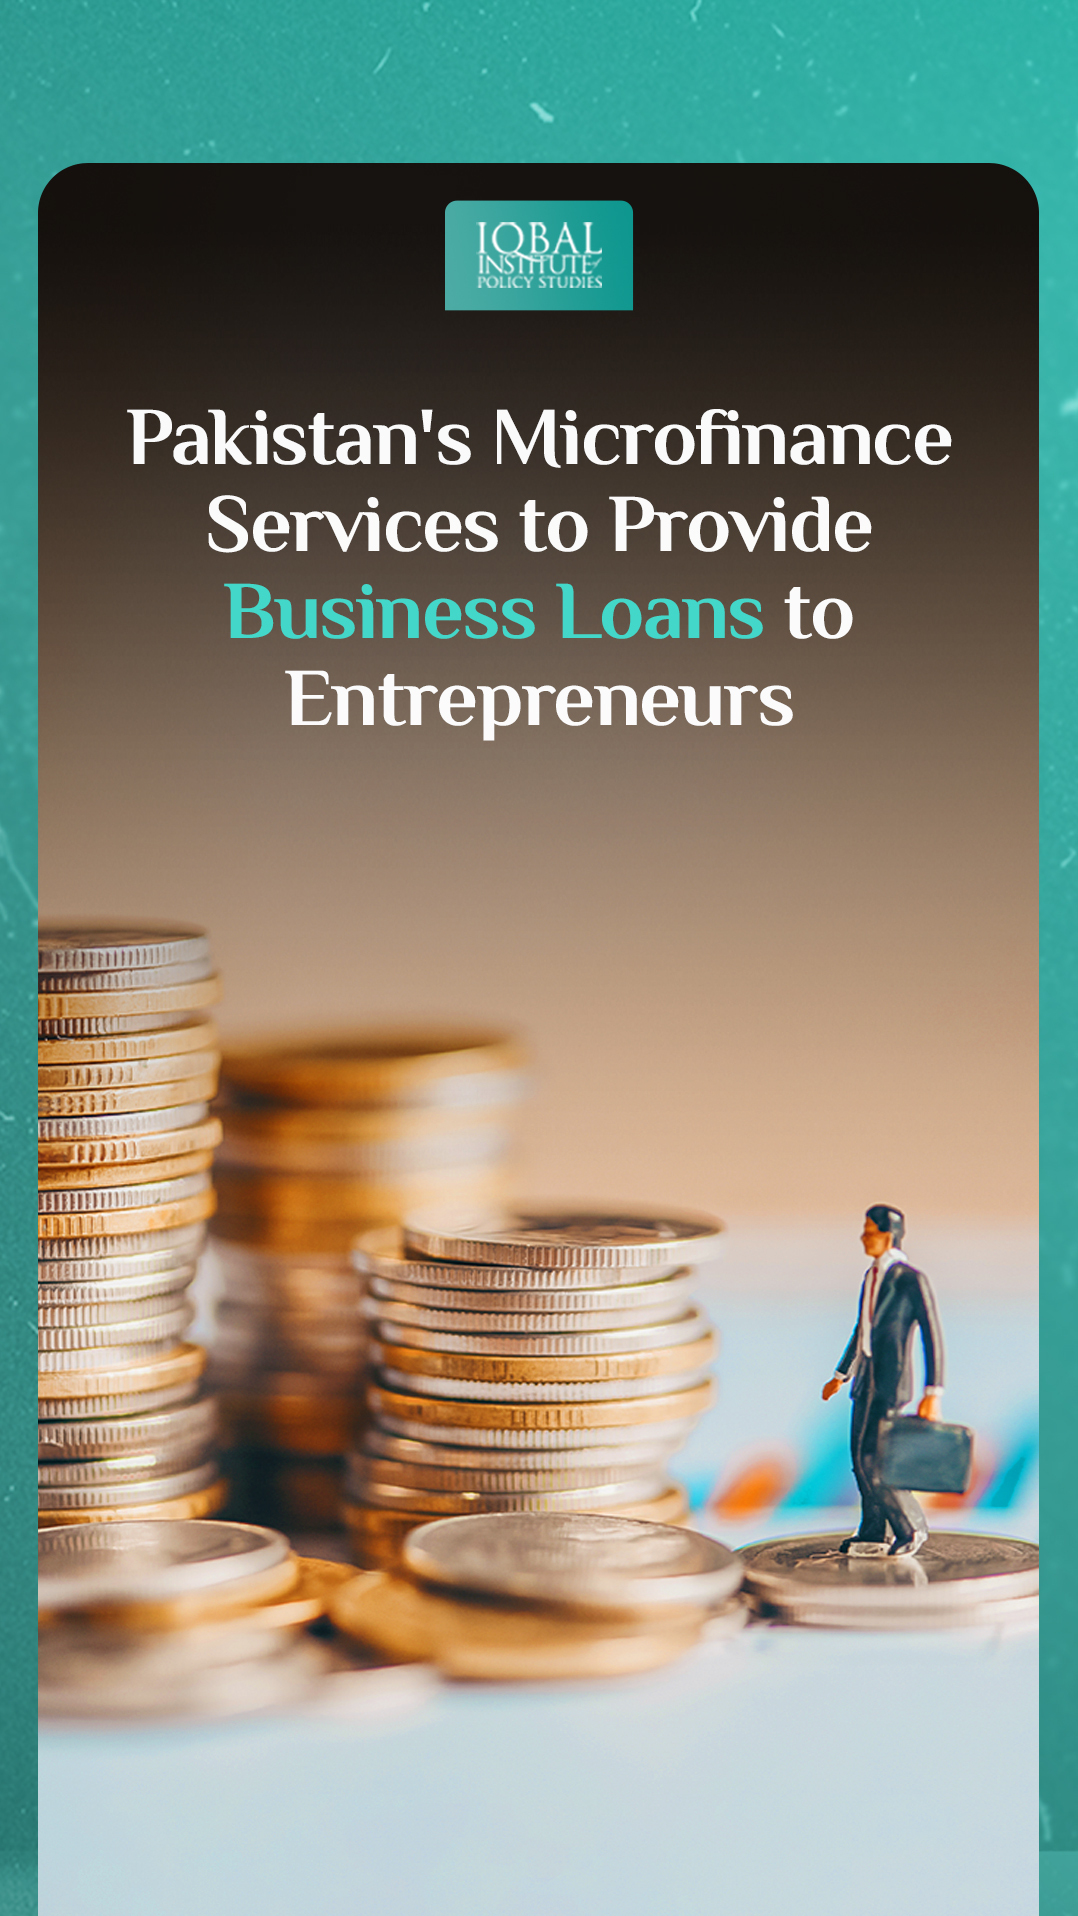 Pakistan's Microfinance Services to provide business loans to entrepreneurs